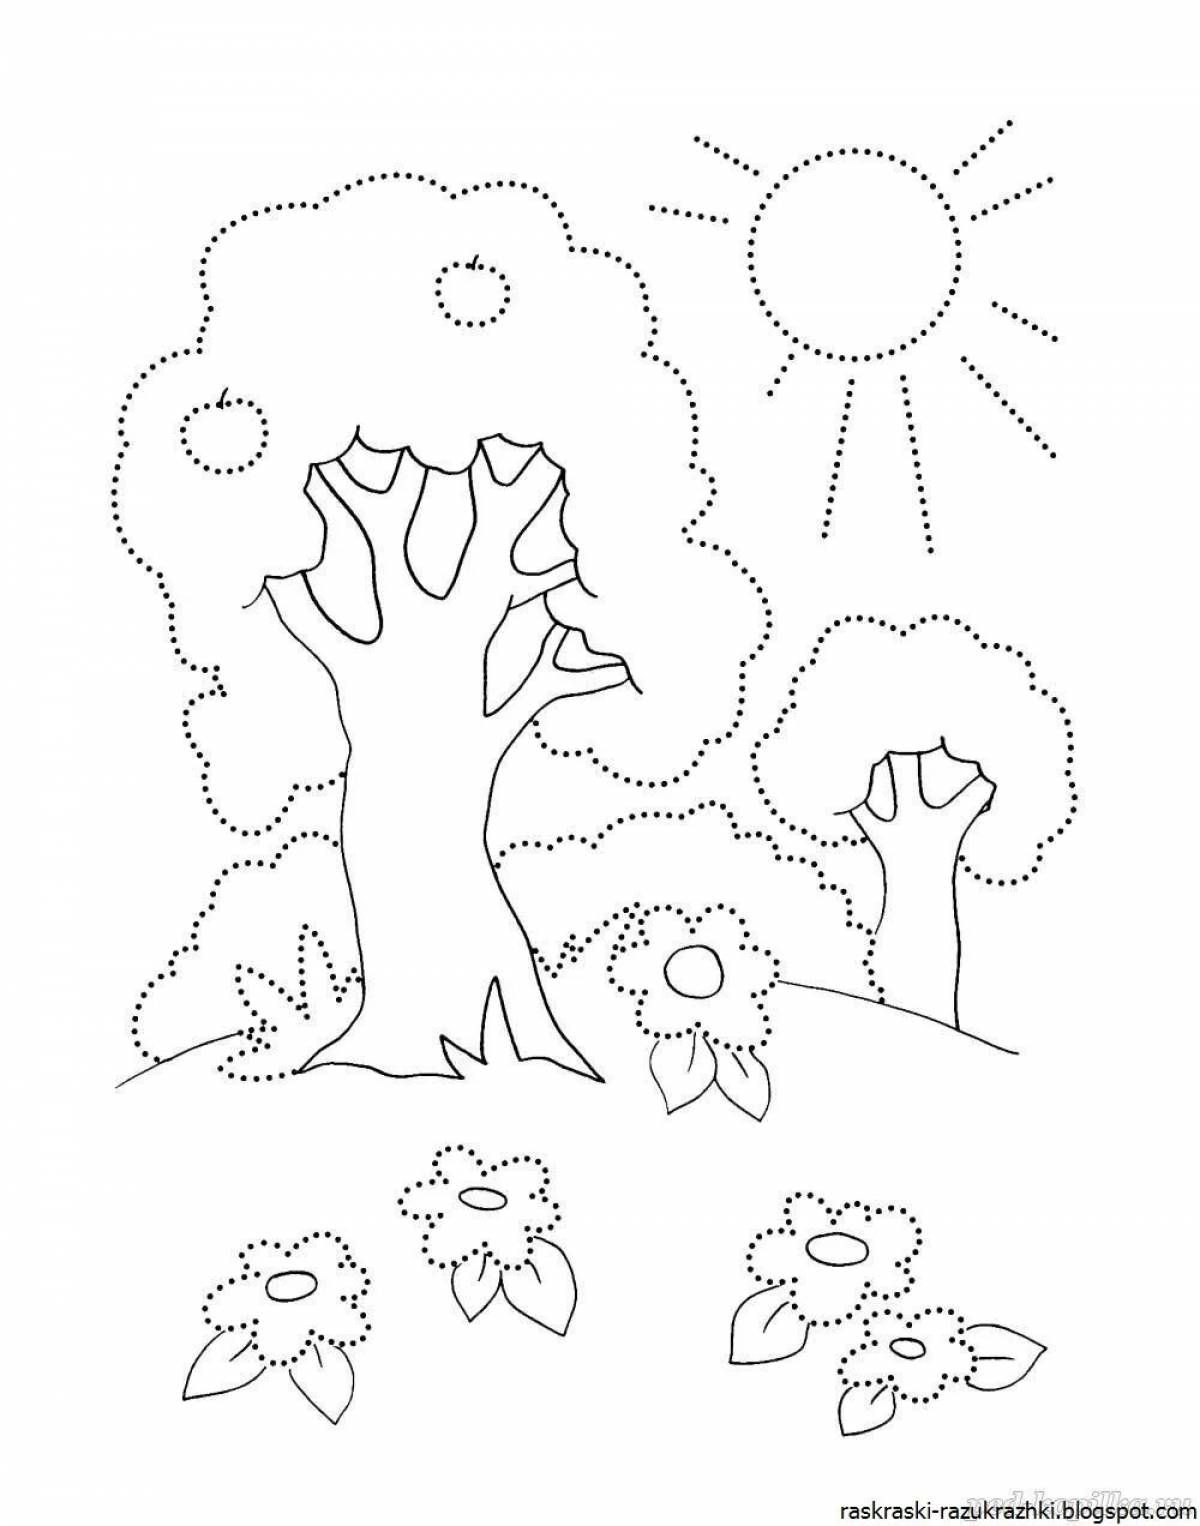 Coloring book shining nature for children 5-6 years old